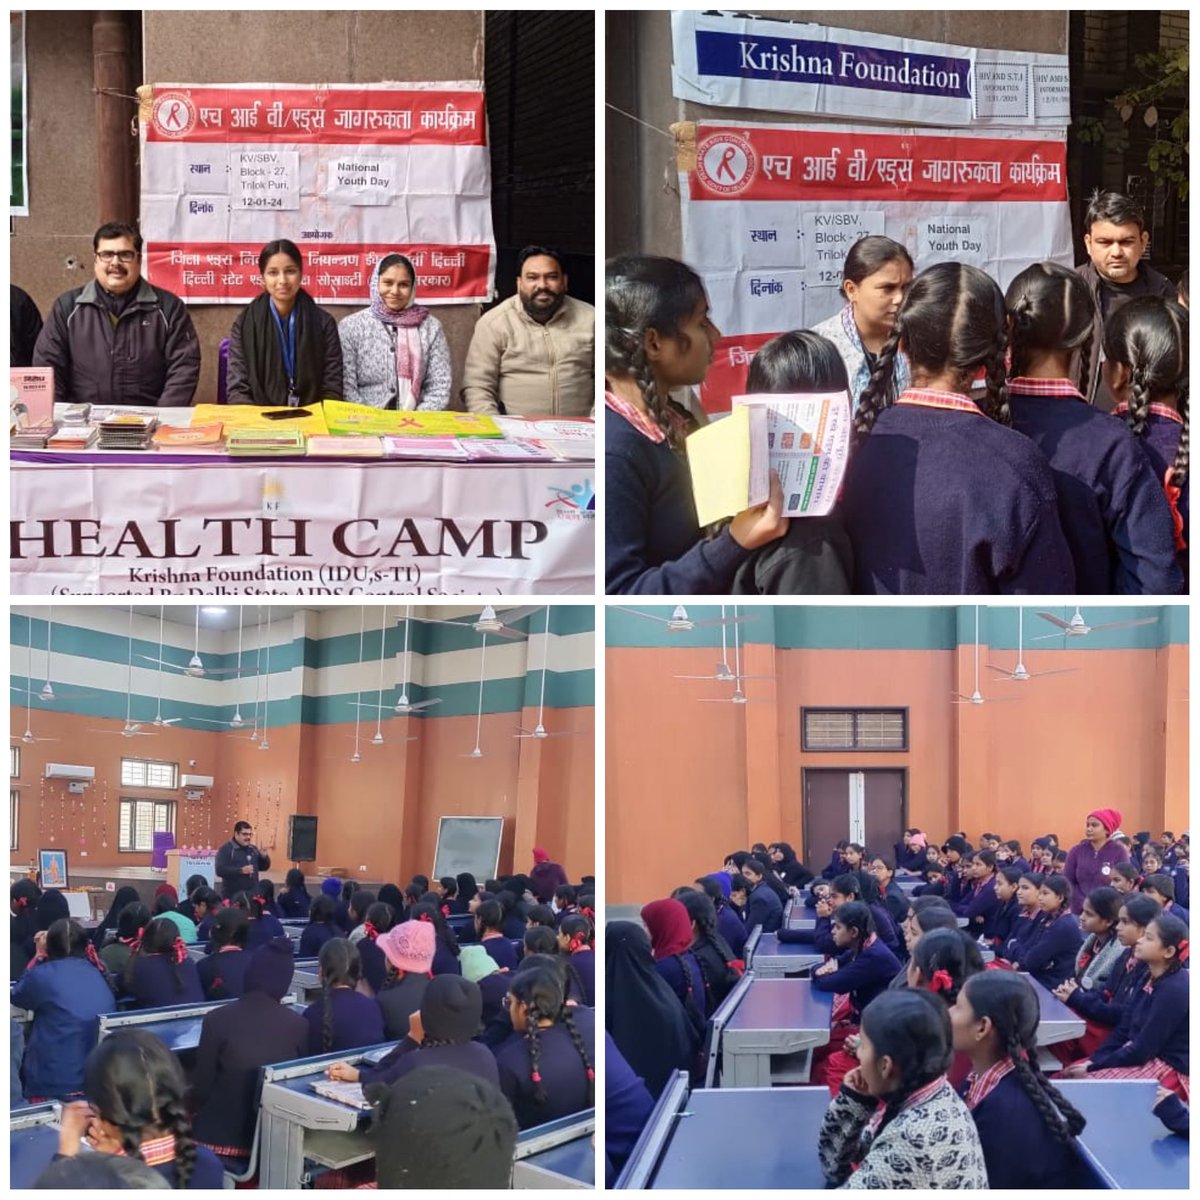 DAPCU East District organised HIV/AIDS awareness camp & awareness session at 27 Block School, Trilokpuri, Delhi on the occasion of National Youth Day.
#NationalYouthDay 
#IndiaFightsHIVandSTI
#LetCommunitiesLead
#Dial1097